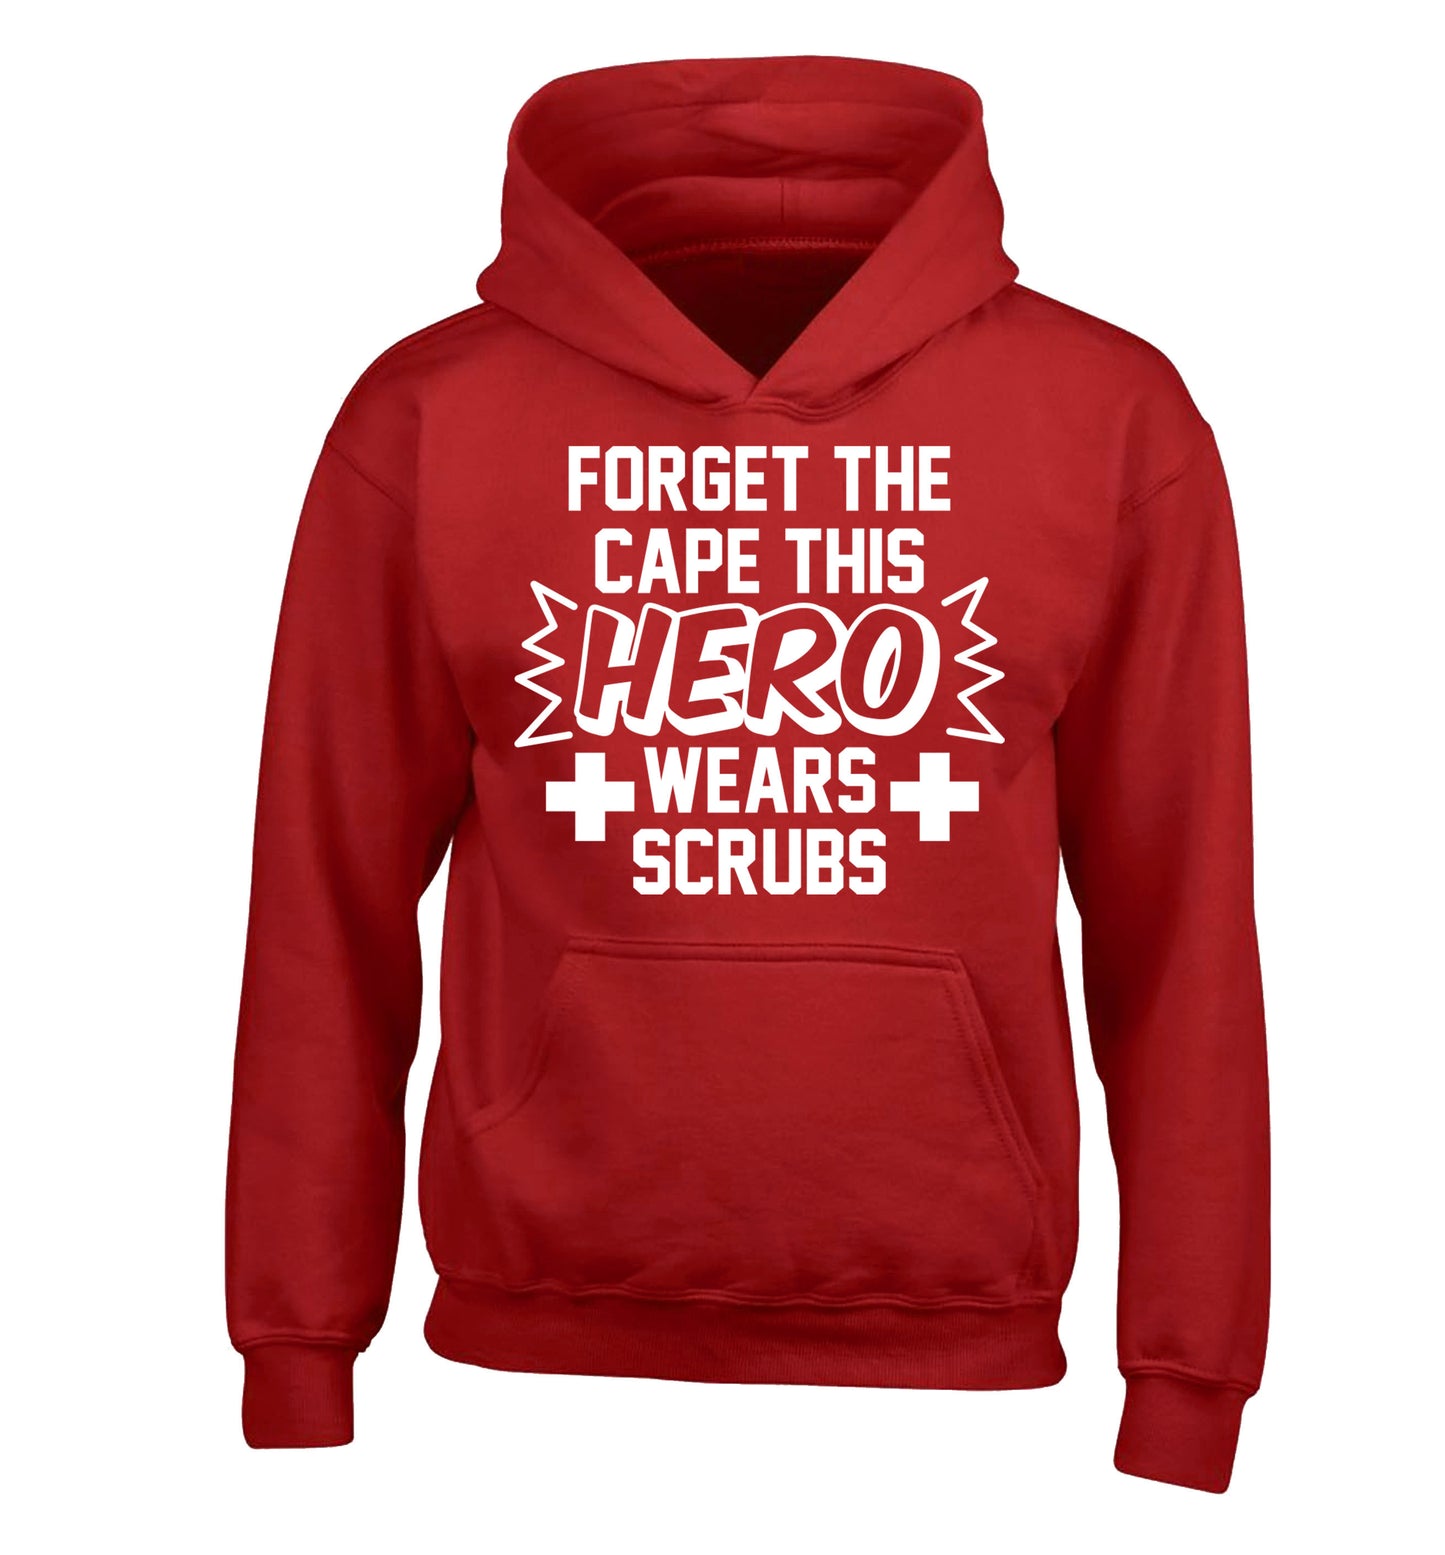 Forget the cape this hero wears scrubs children's red hoodie 12-14 Years